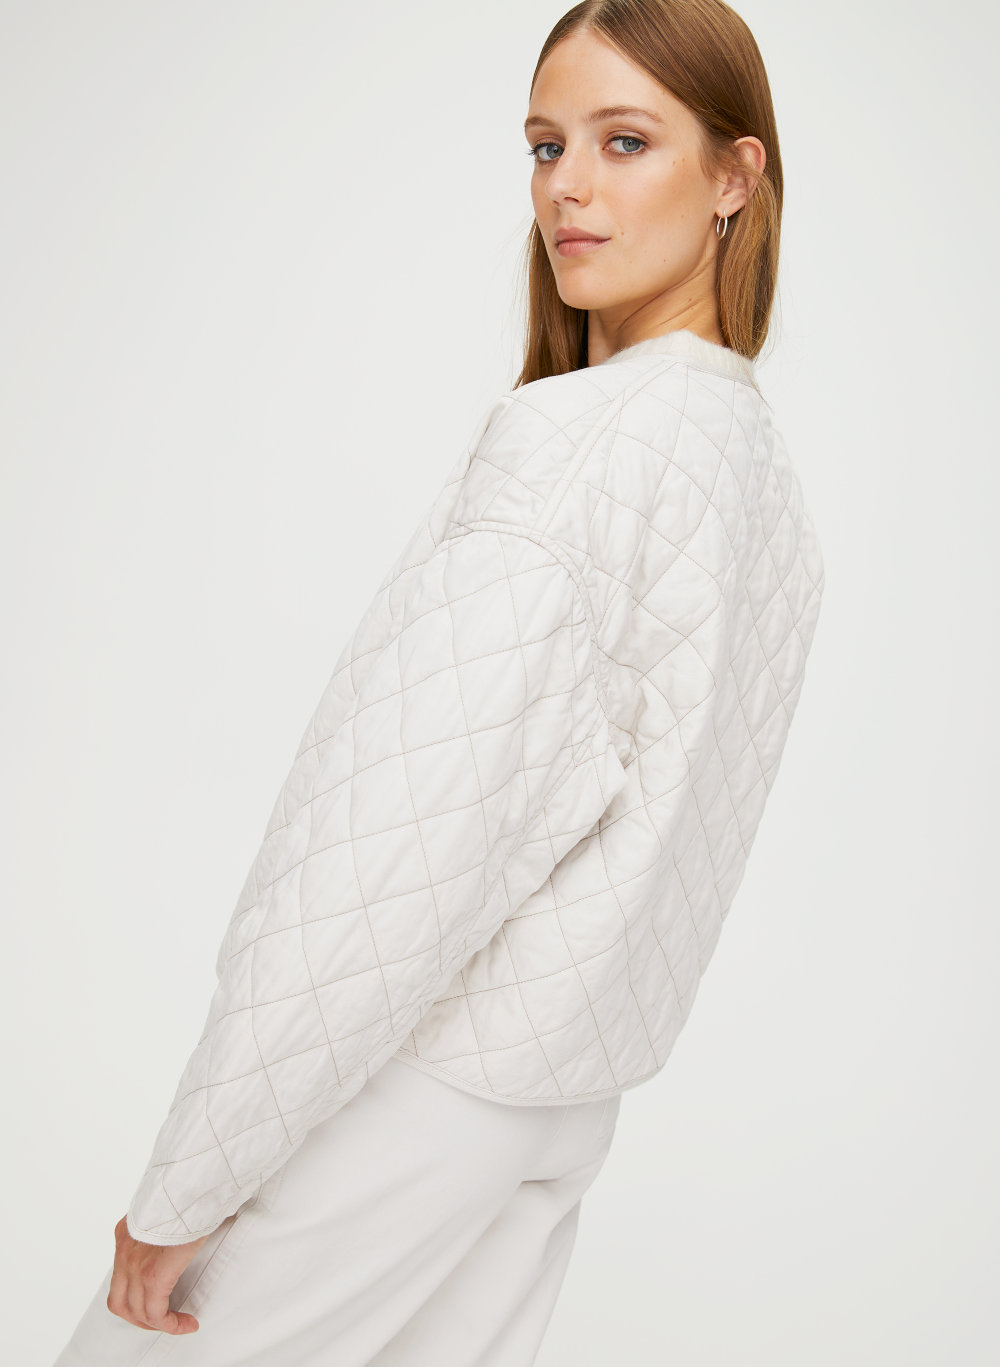 Wilfred Free QUILTED BOMBER JACKET | Aritzia INTL